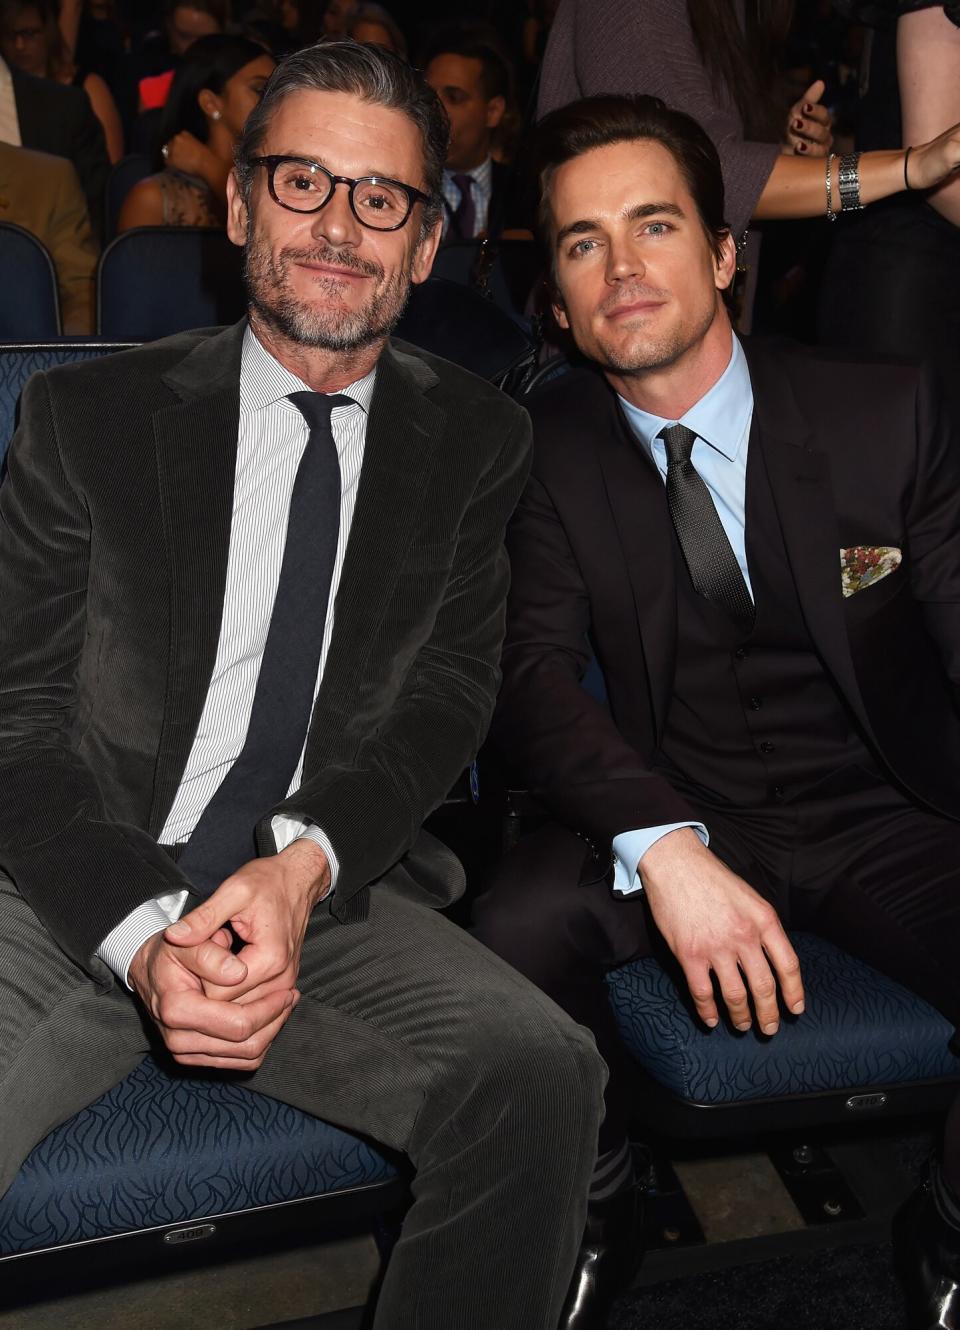 Simon Halls (L) and actor Matt Bomer attend The 41st Annual People's Choice Awards at Nokia Theatre LA Live on January 7, 2015 in Los Angeles, California